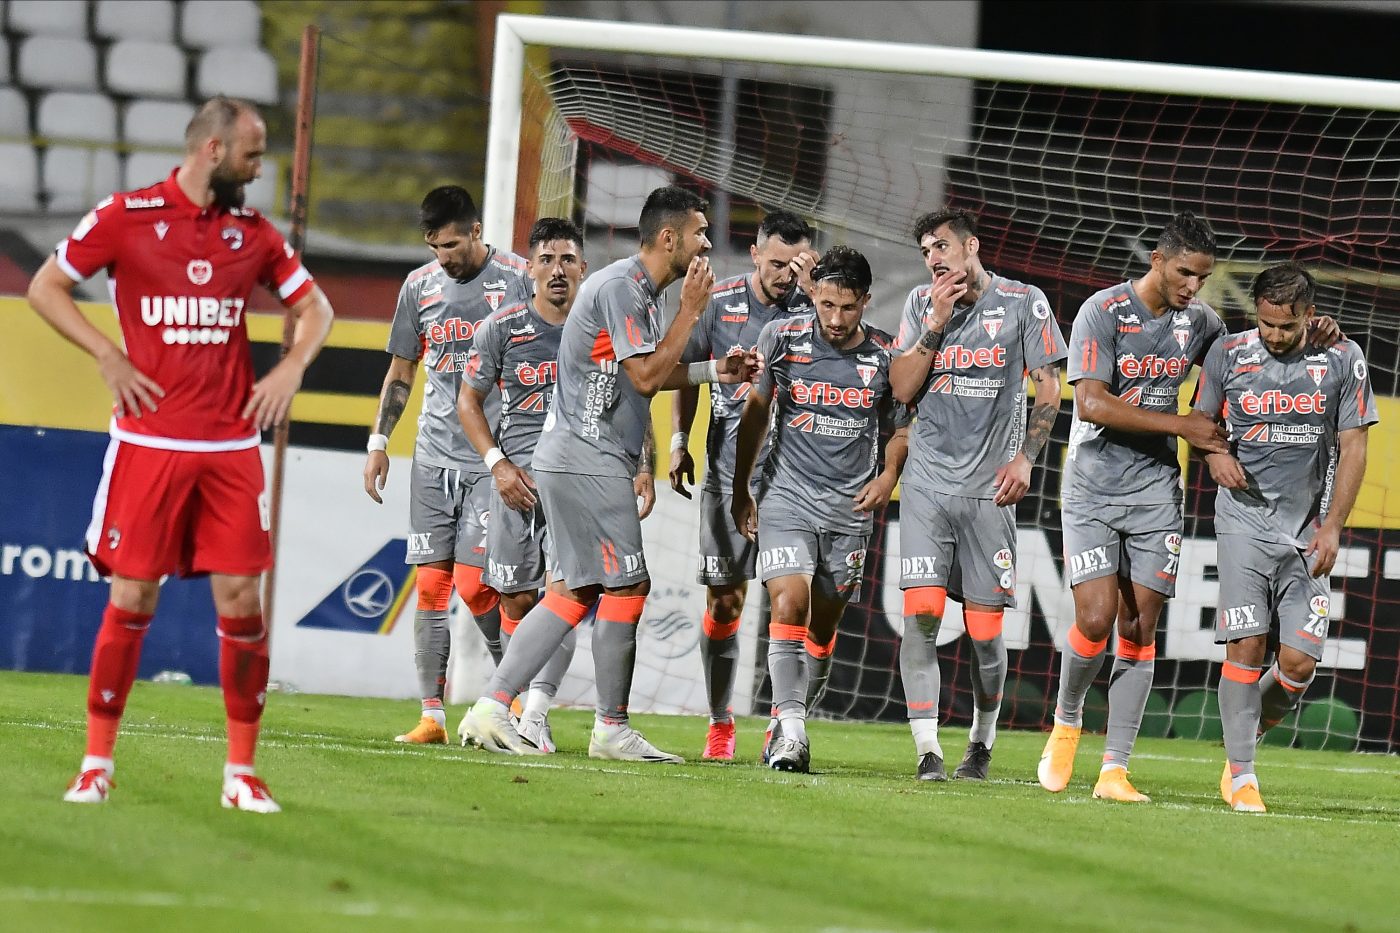 Dinamo Uta Arad 0 1 In The 5th Round Of League 1 The People Of Arad Get The First Victory In The Championship And Overtake The Dogs In The Ranking Photo Gallery